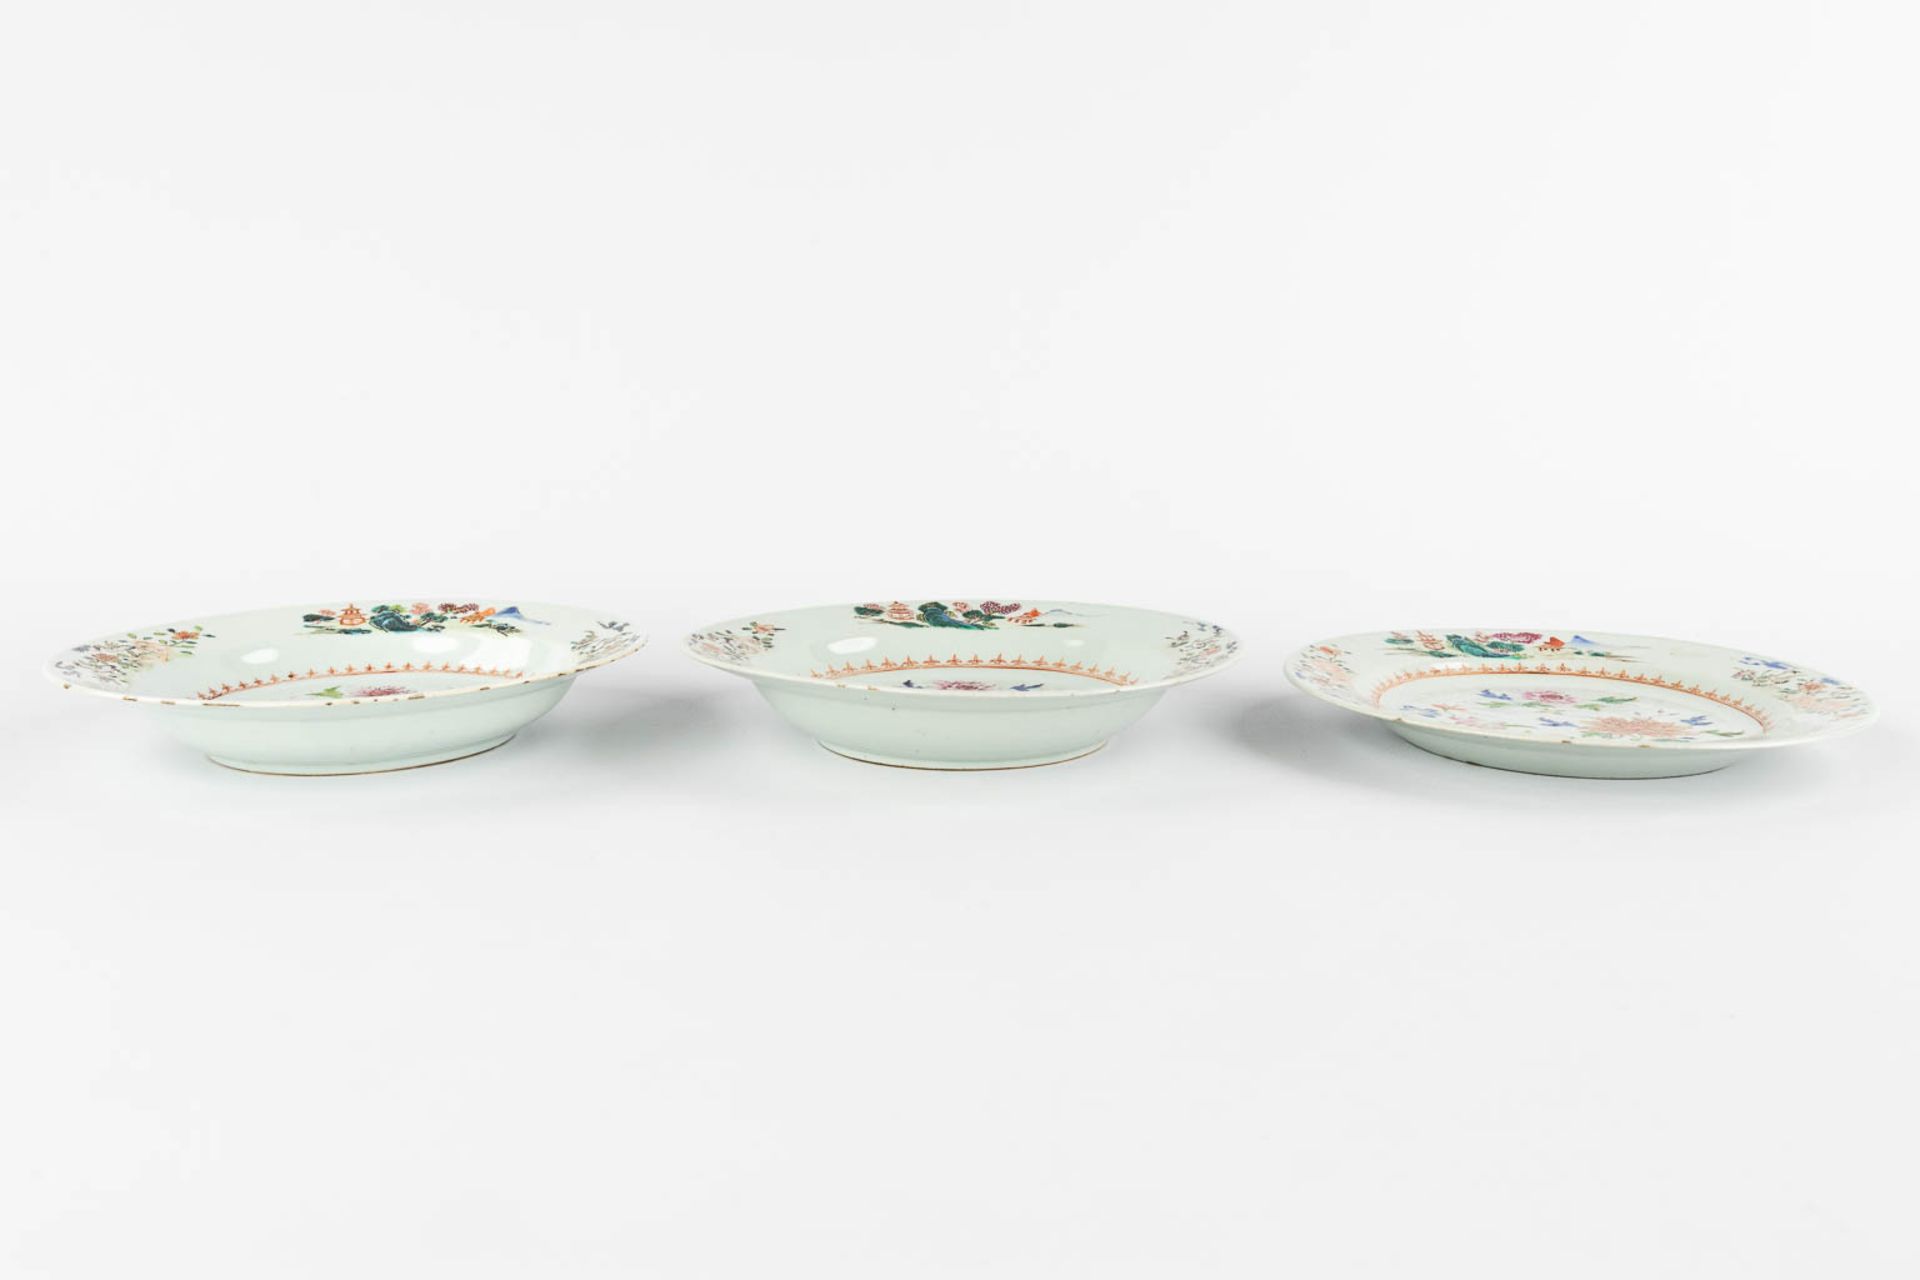 Three Chinese Famille Rose plates with a floral decor. 19th C. (D:22,5 cm) - Image 3 of 11